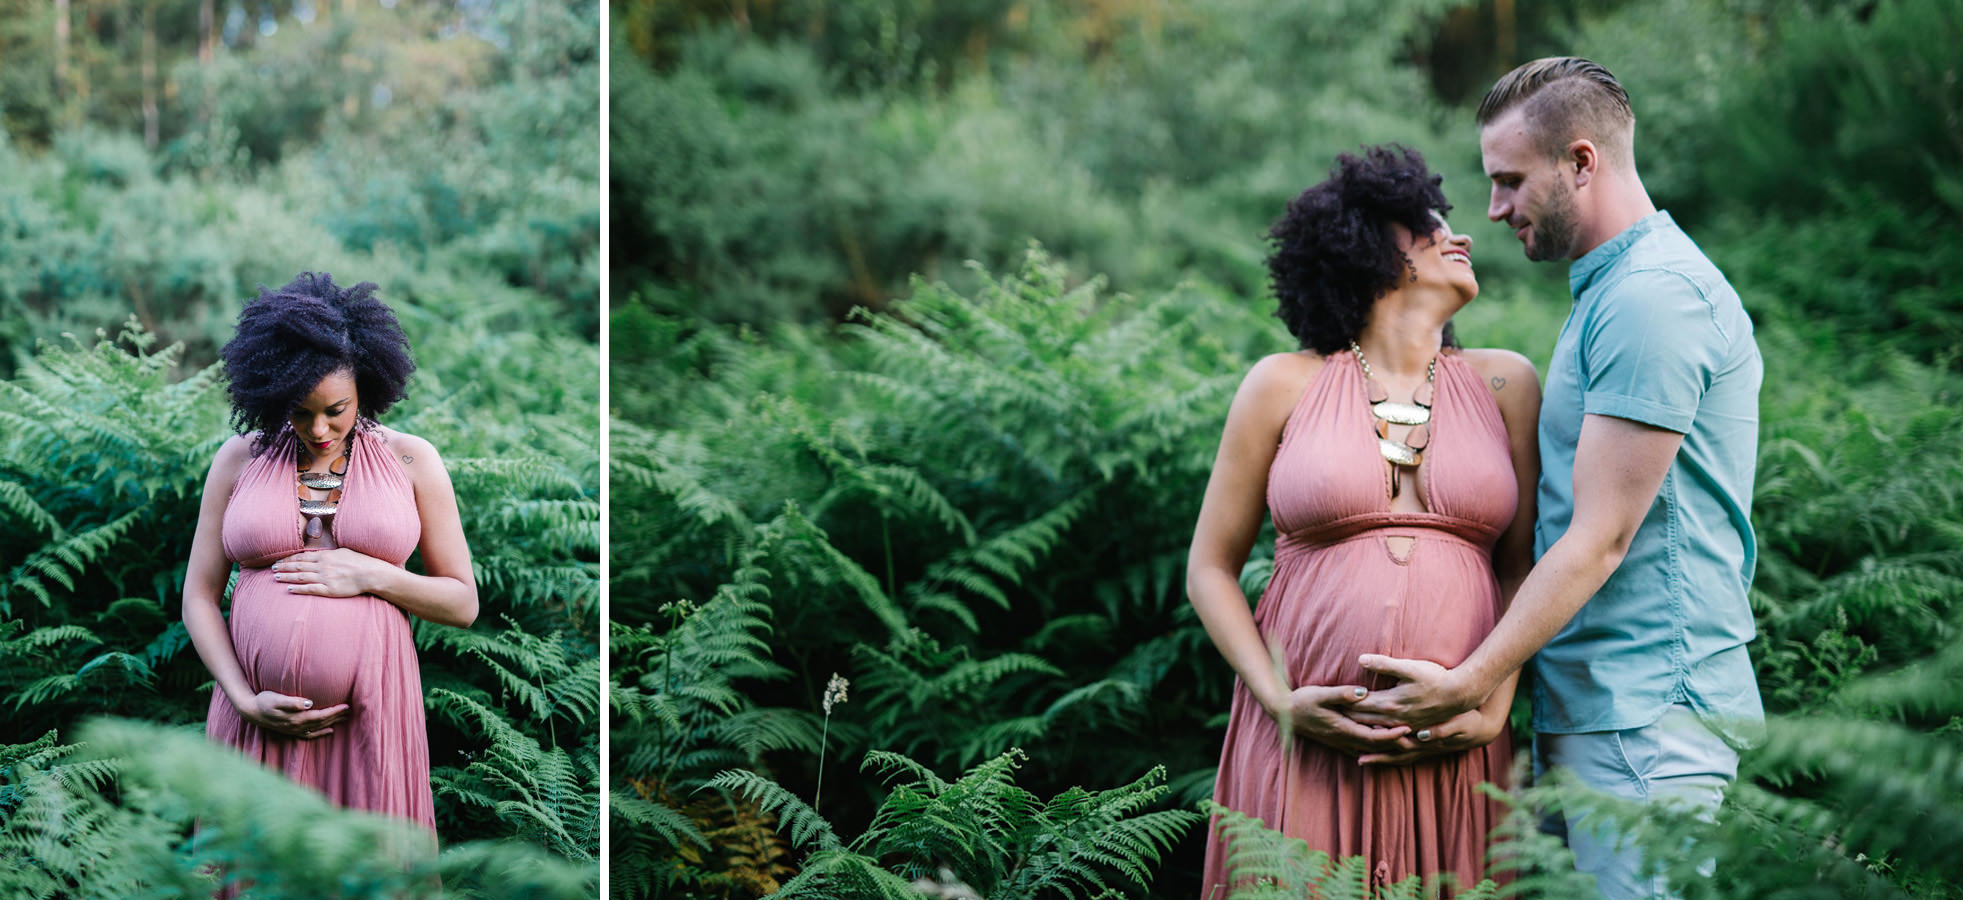 outdoor maternity of couple and mum in free people dress afro hair in ferns Maternity pregnancy bump image natural hampshire berkshire surrey yasmin anne photography